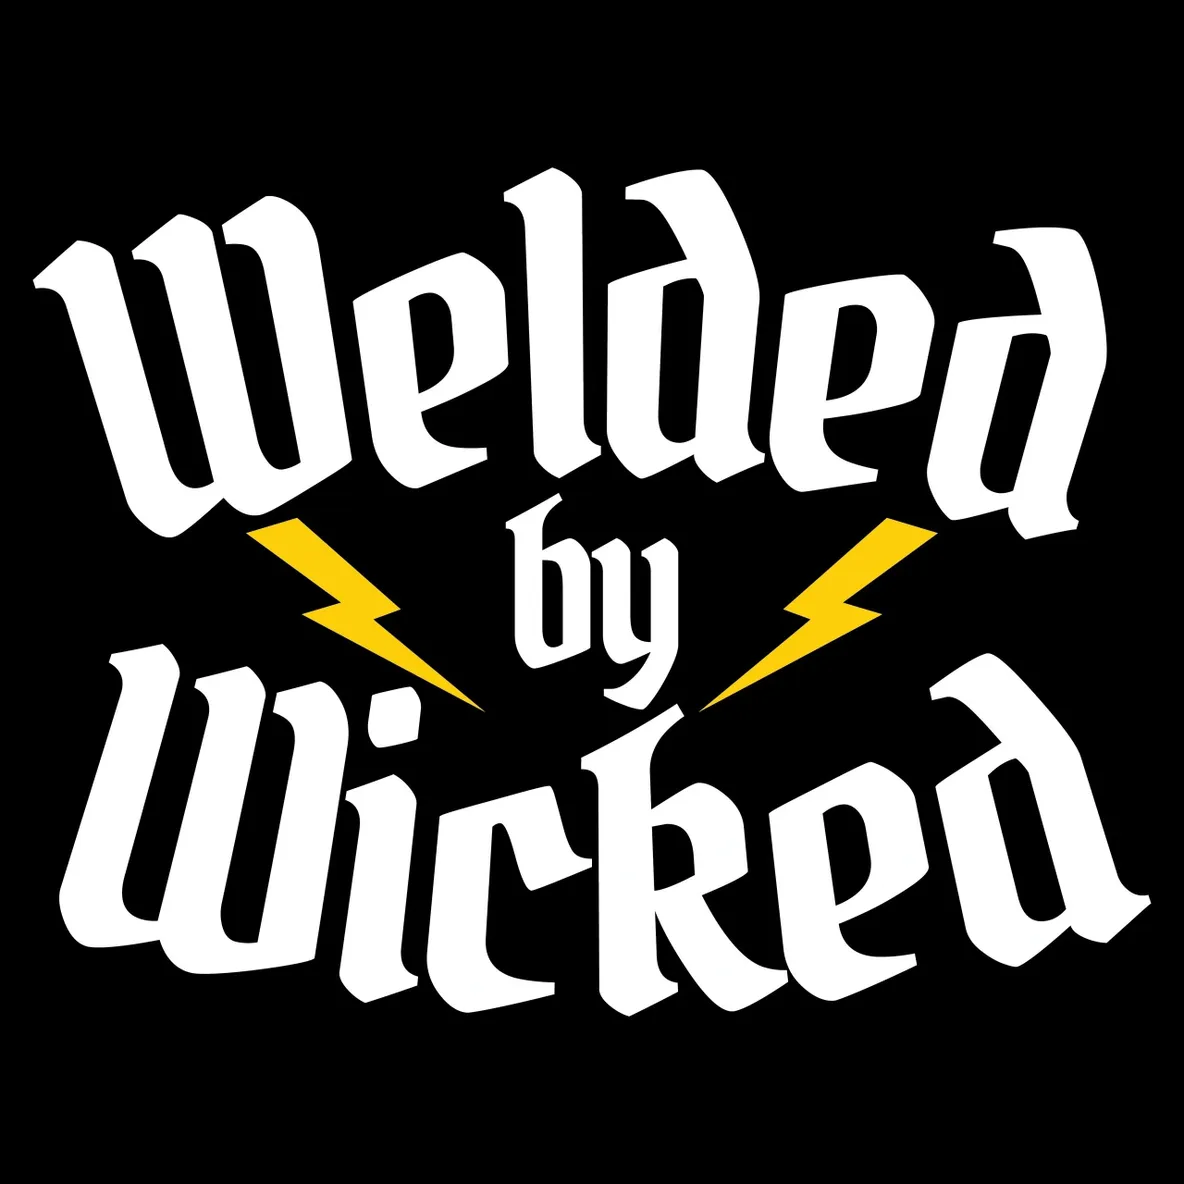 A black background with white lettering that says welded by wicked.